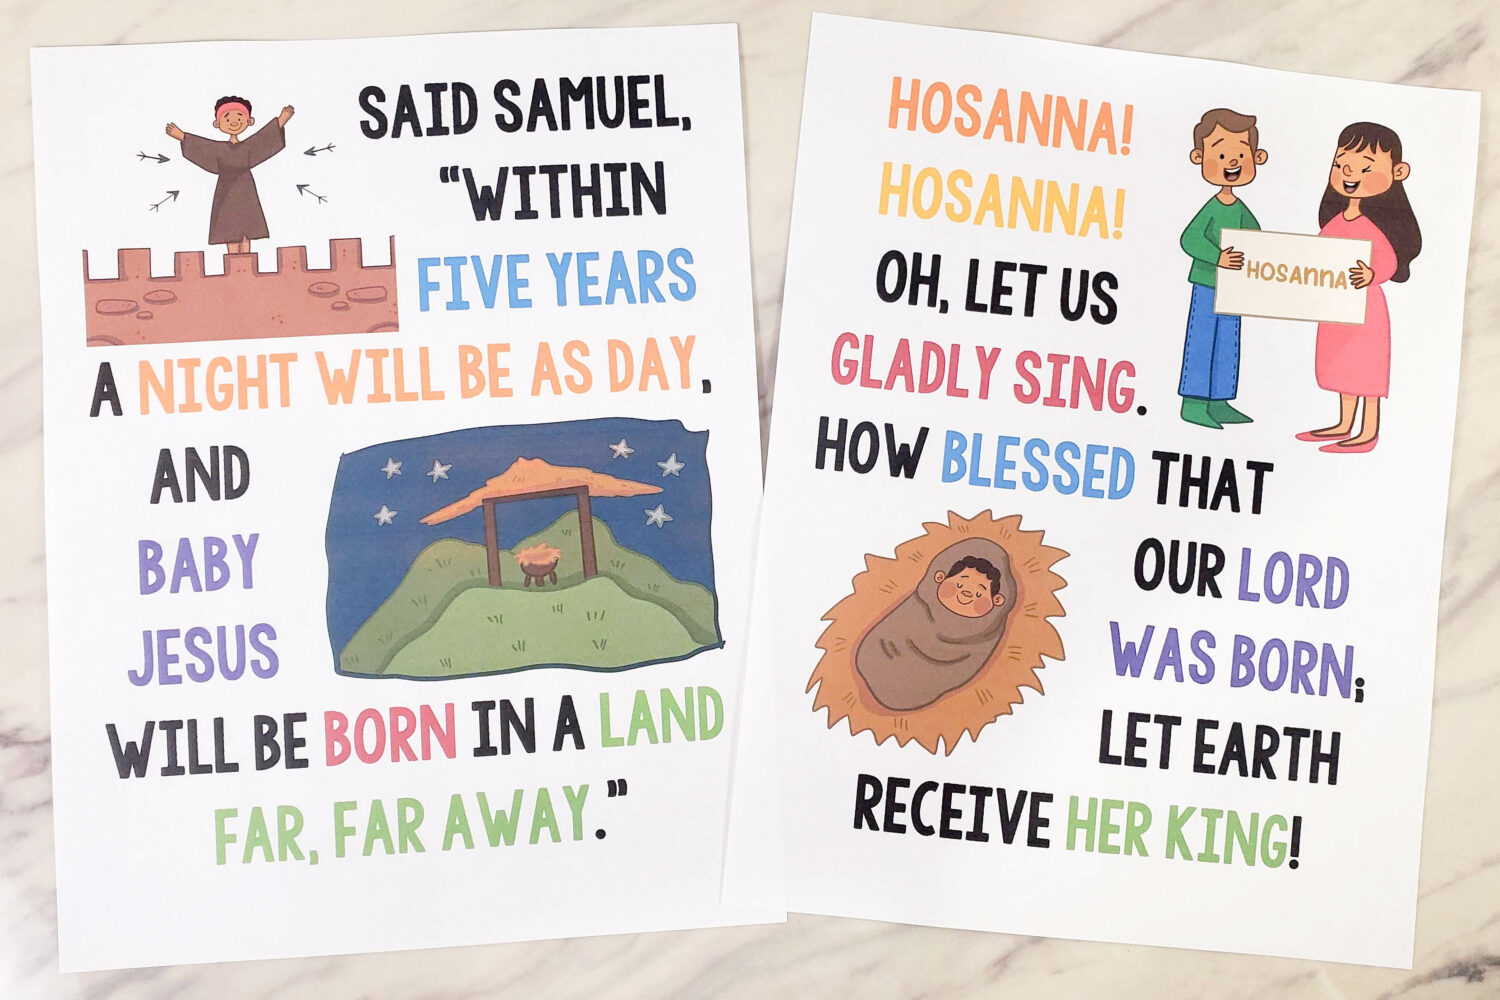 Samuel Tells of the Baby Jesus Flip Chart printable singing time song helps with lots of print styles including portrait, landscape, keywords or full lyrics, and even a slideshow! Print in color or black and white. A wonderful resource for LDS Primary music leaders.